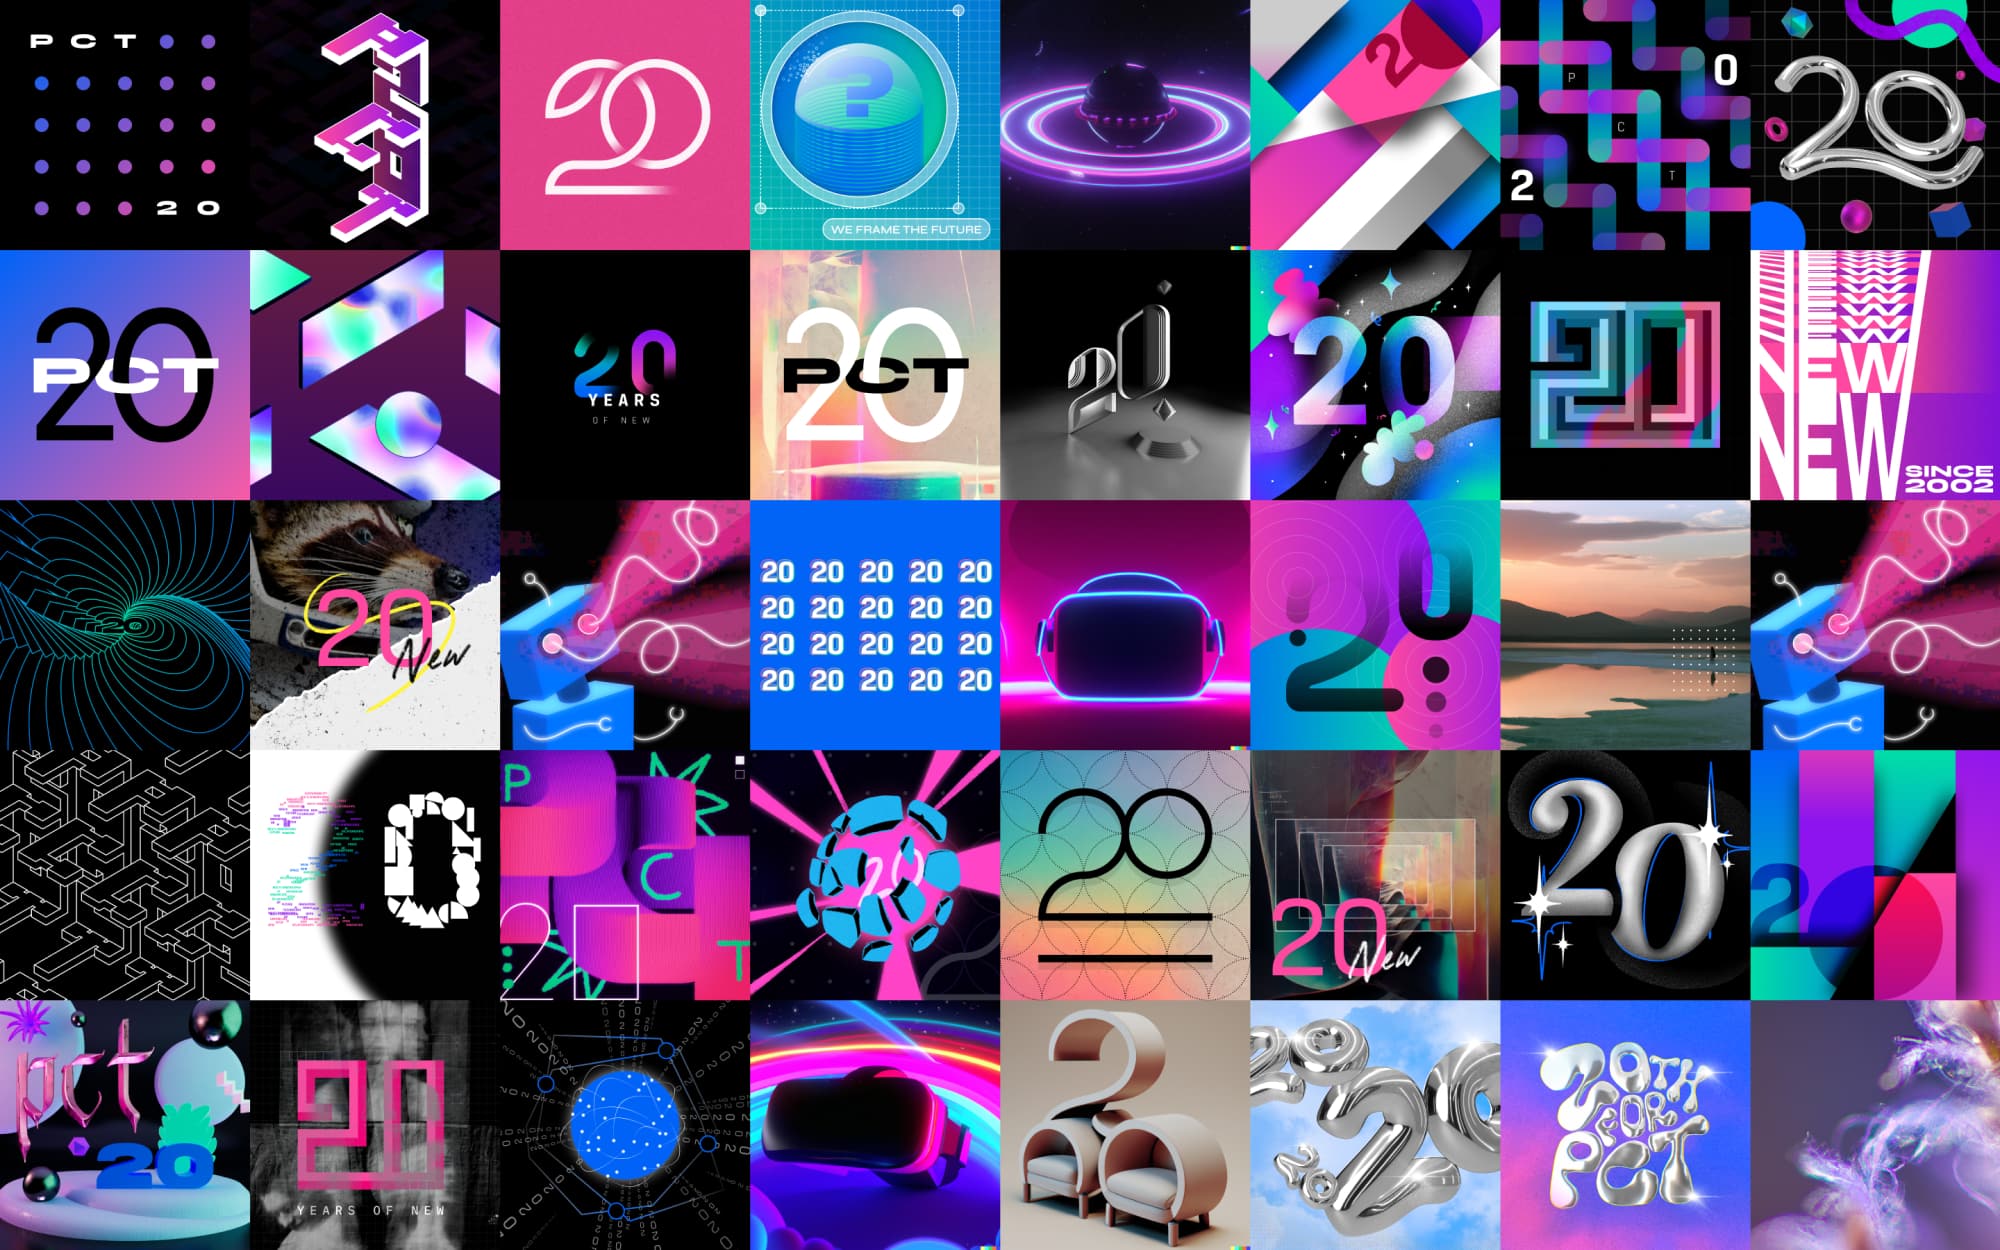 Collage of experinmental designs celebrating 20 years at punchcut